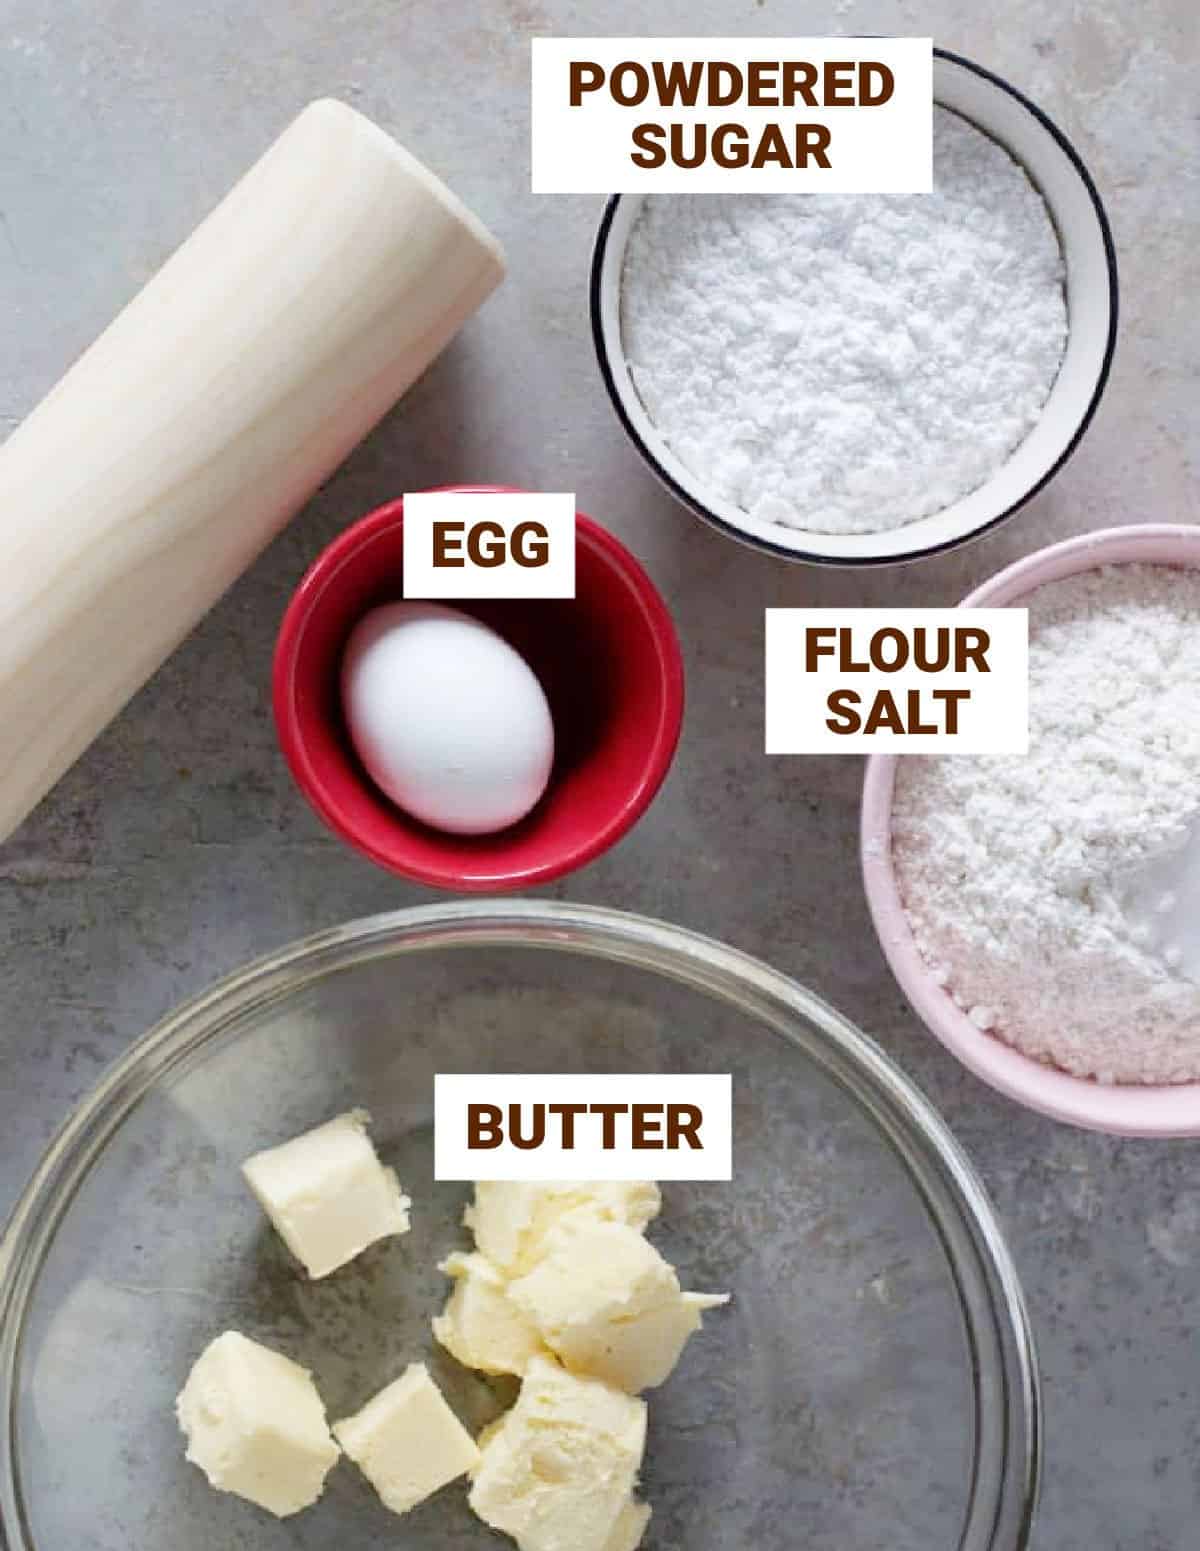 Sweet pie crust ingredients in bowls on grey surface, including butter, egg, sugar, salt, and rolling pin.